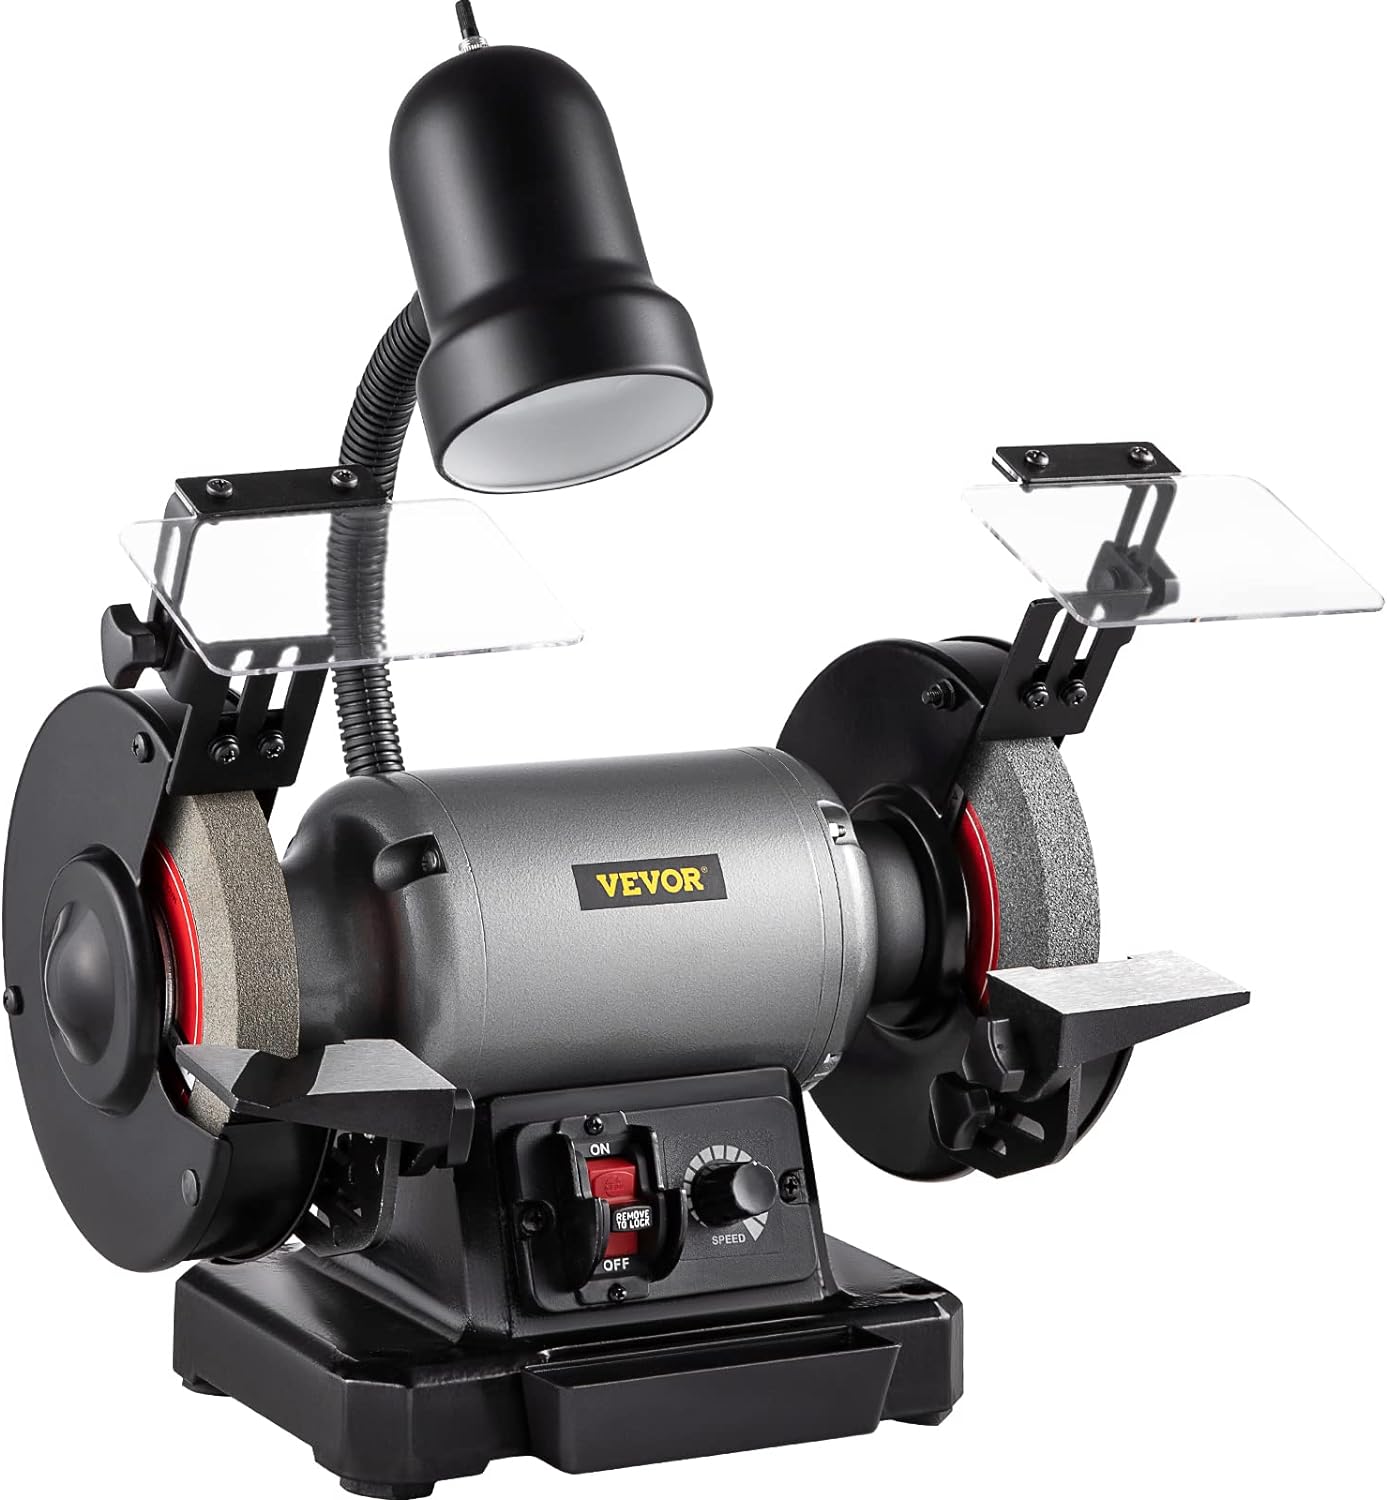 VEVOR 6 inch Bench Grinder, 750W Motor, Variable-Speed Benchtop Grinder with 3400 RPM and Work Light, Two Types Wheels for Grinding, Sharping and Smoothing